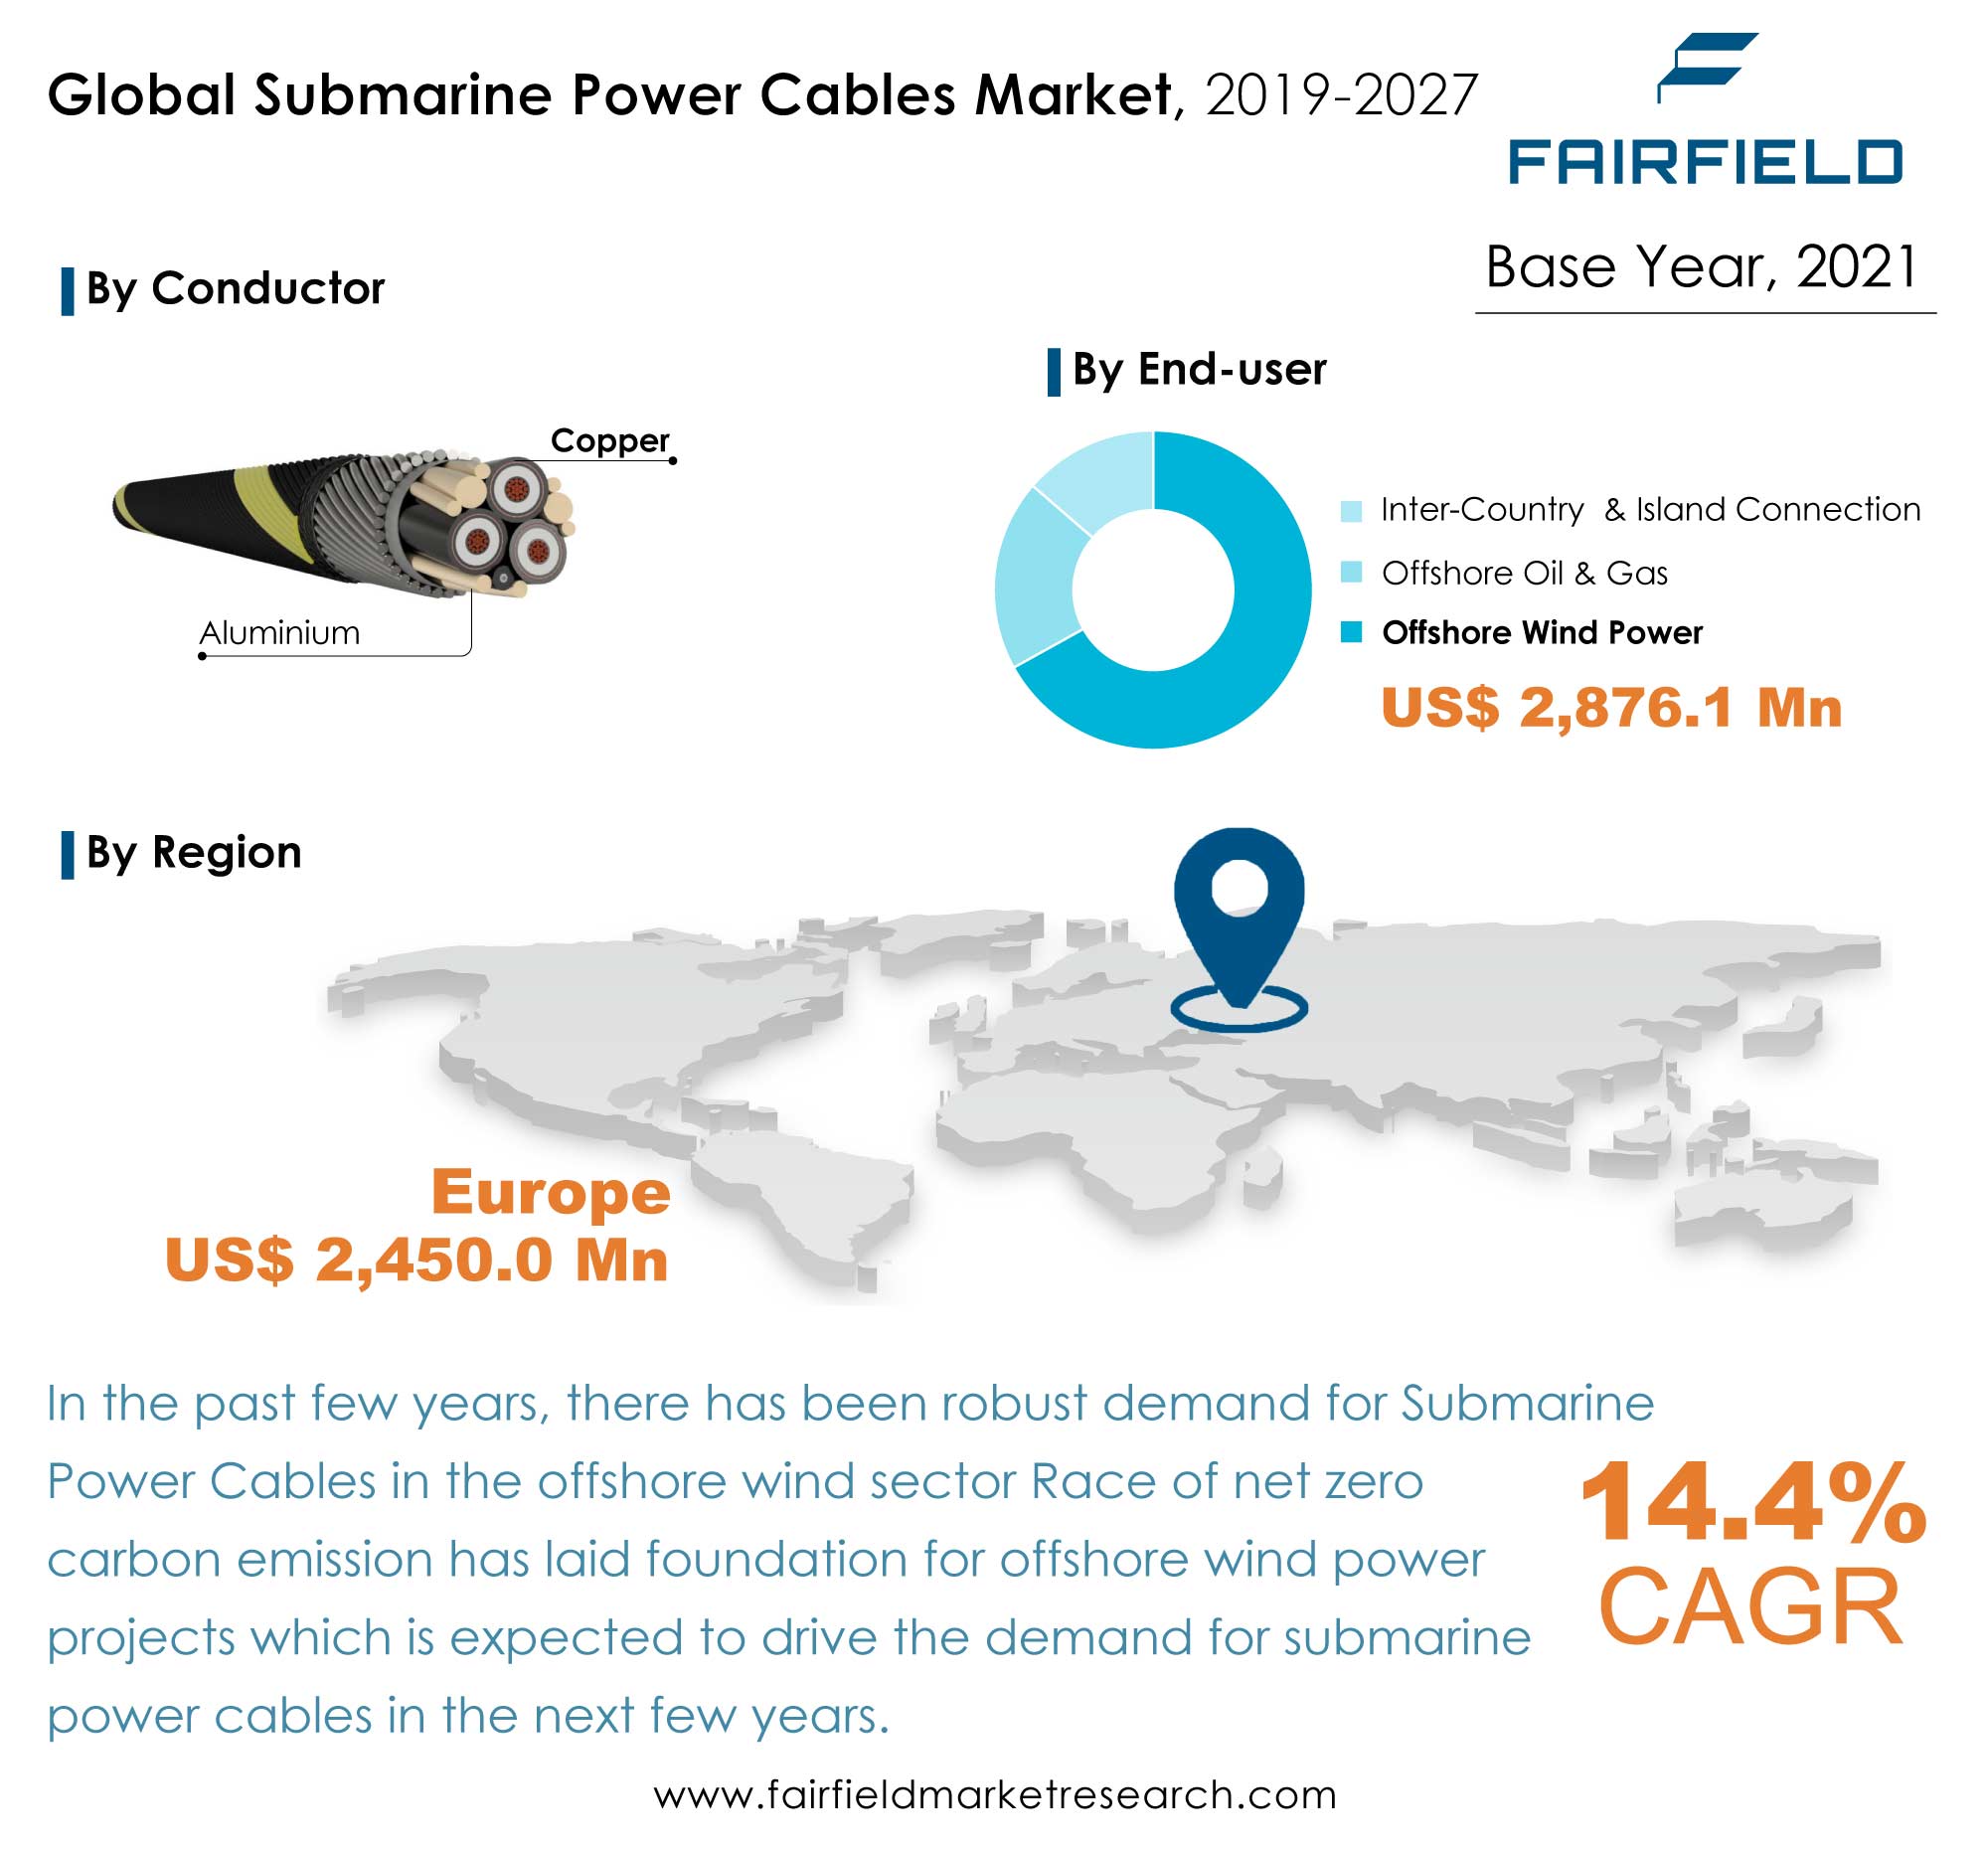 Submarine Power Cables Market